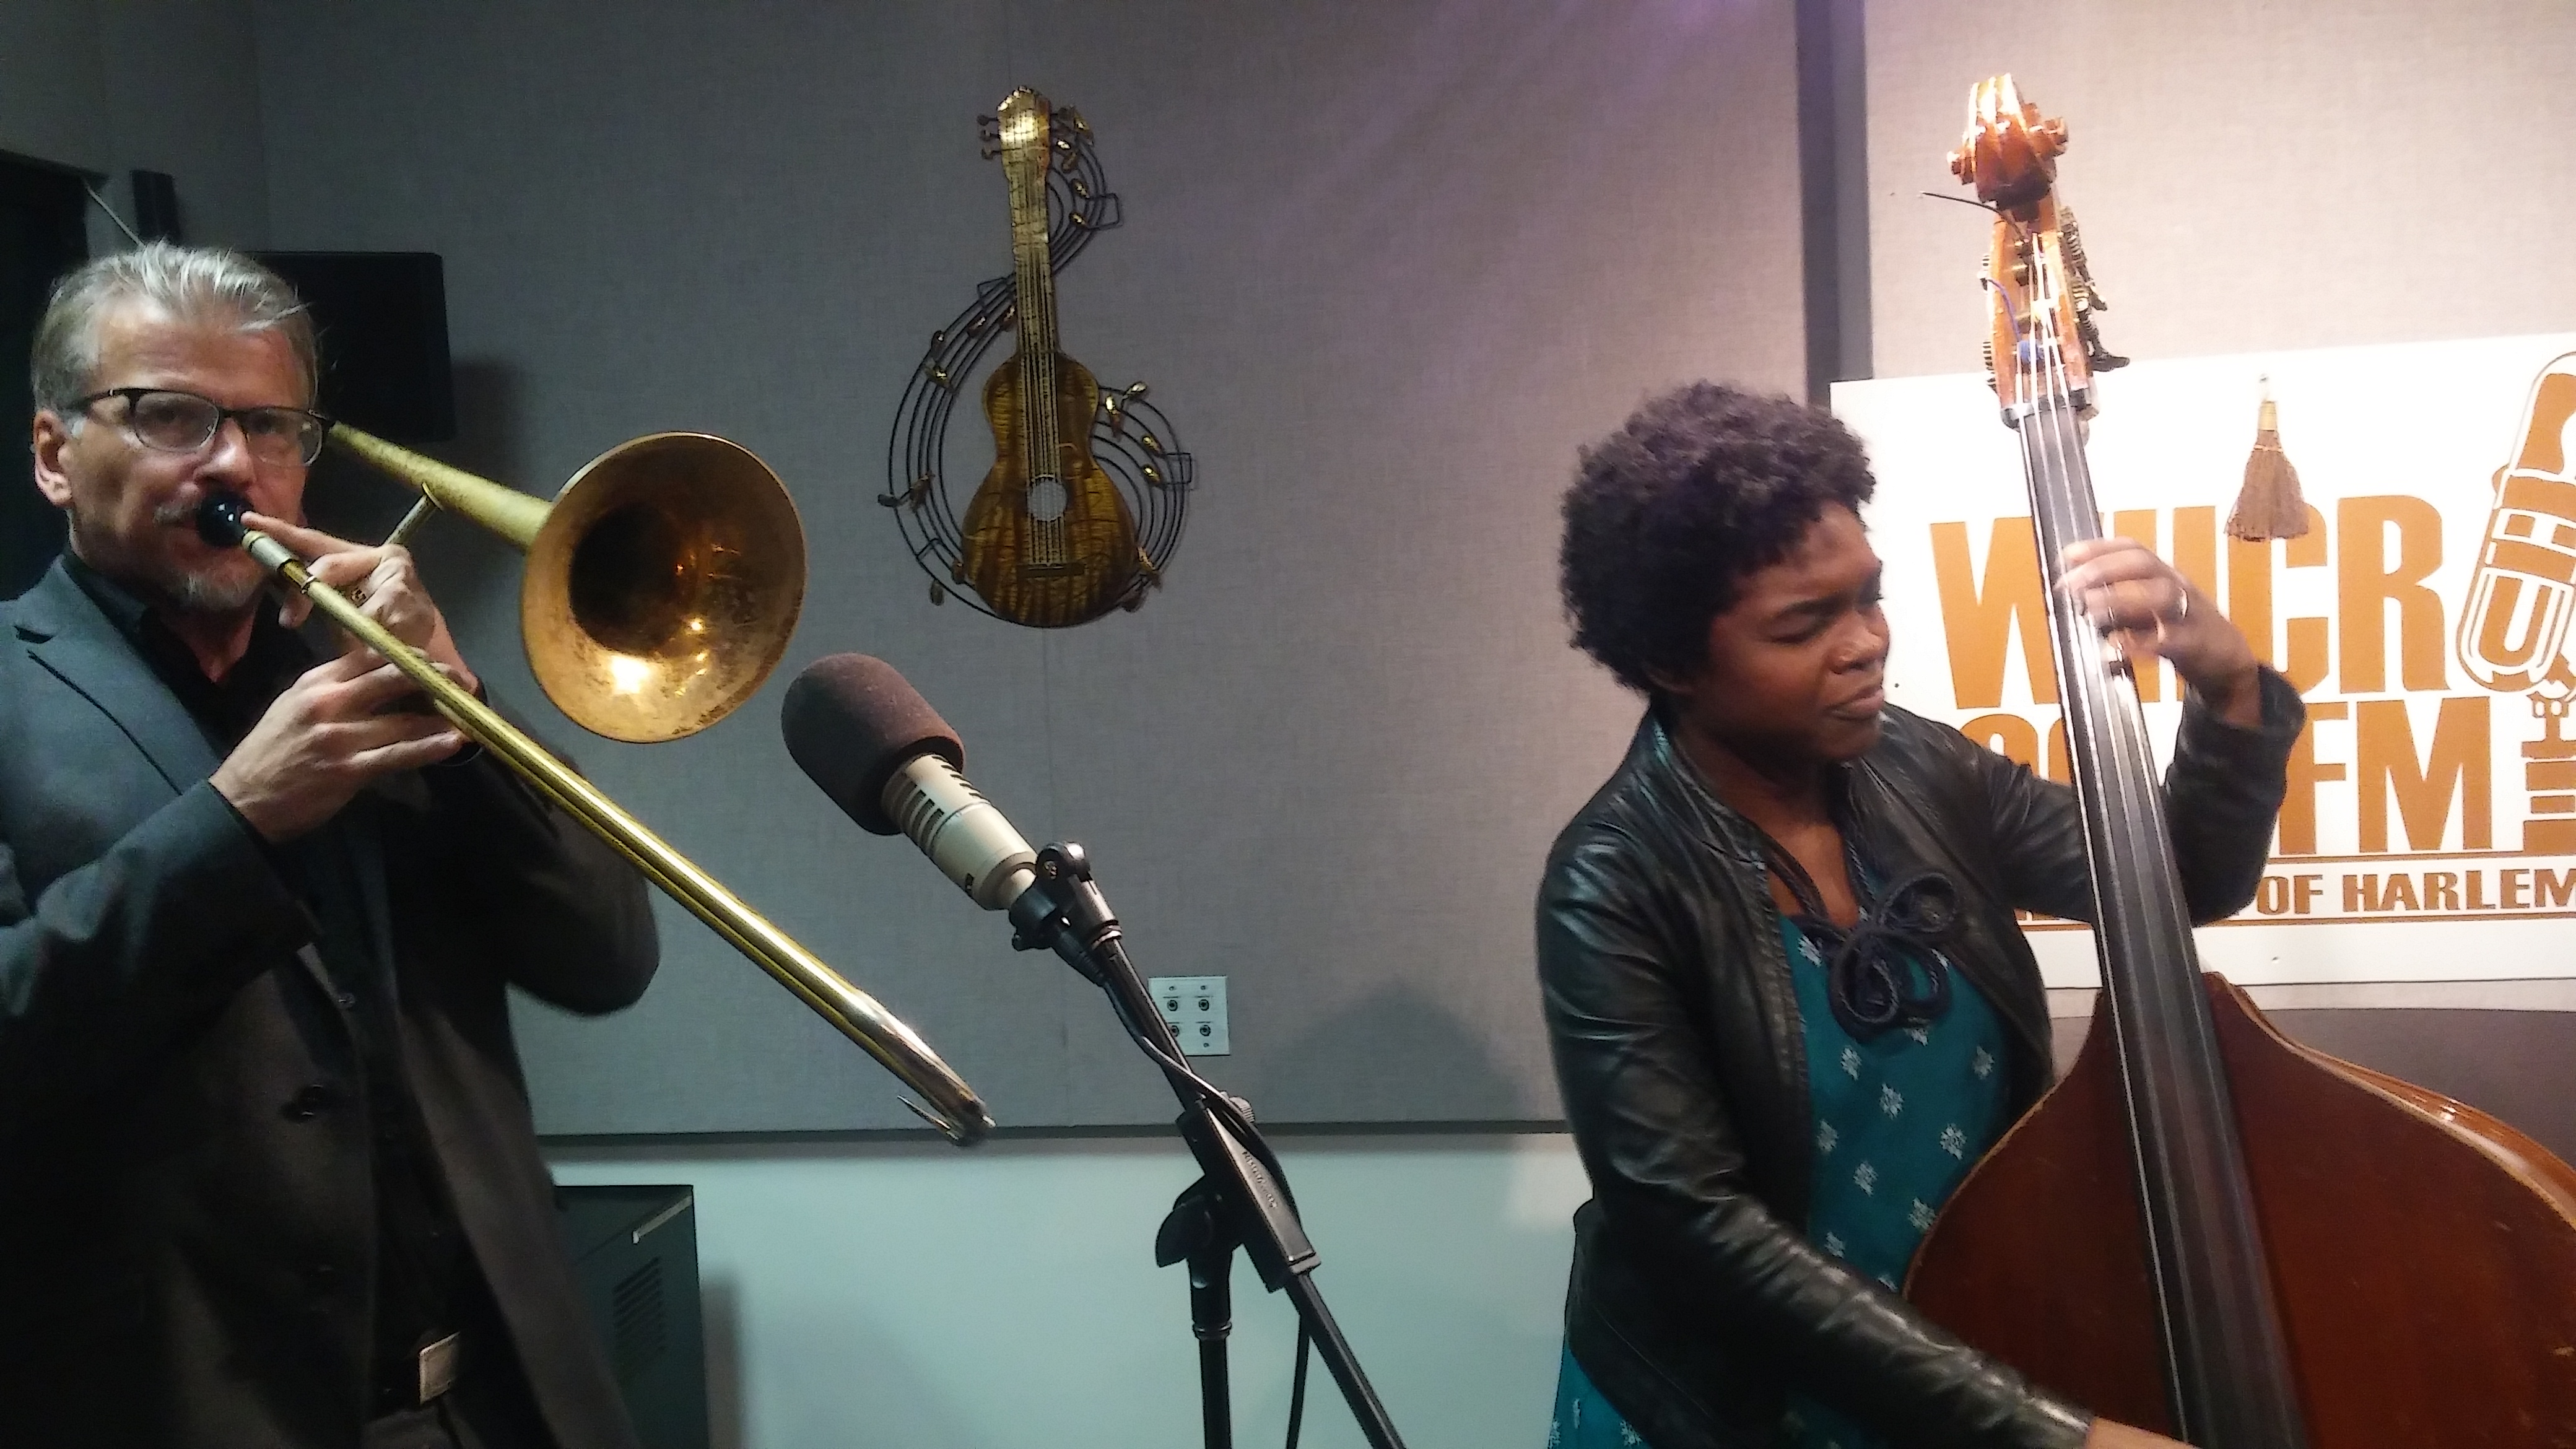 NEA Jazz Masters Breakfast at 90.3FM/NY WHCR - Two people playing musical instruments